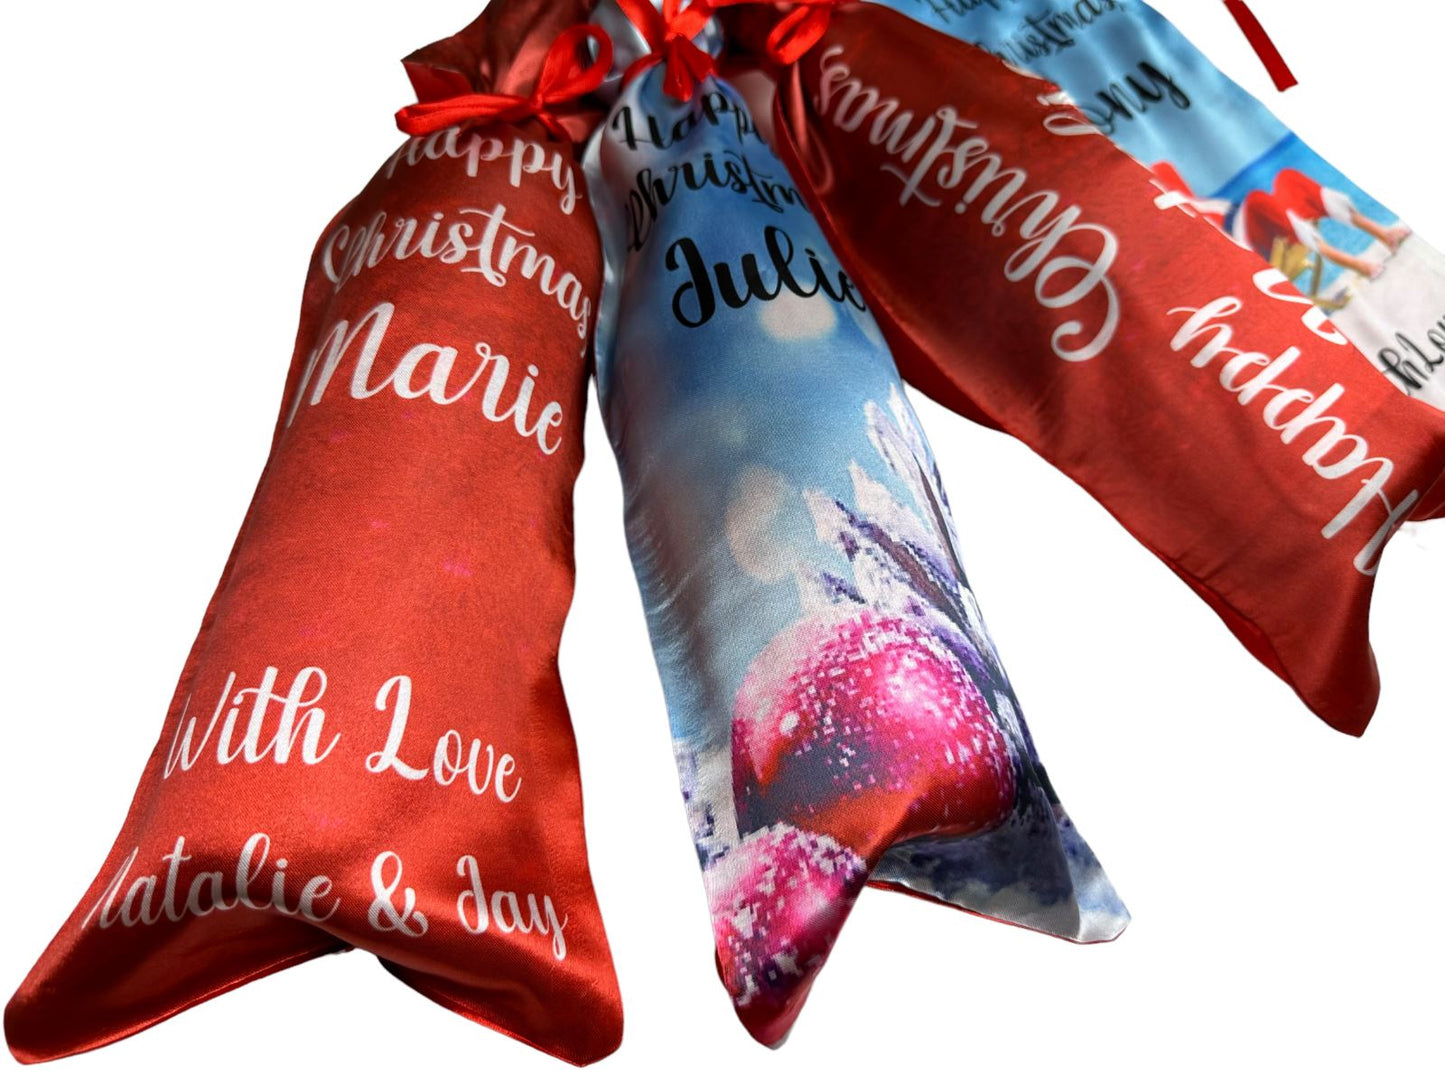 Christmas Wine Bottle Bag - Personalised Santa Claus Cover Xmas Decor Gift Bags